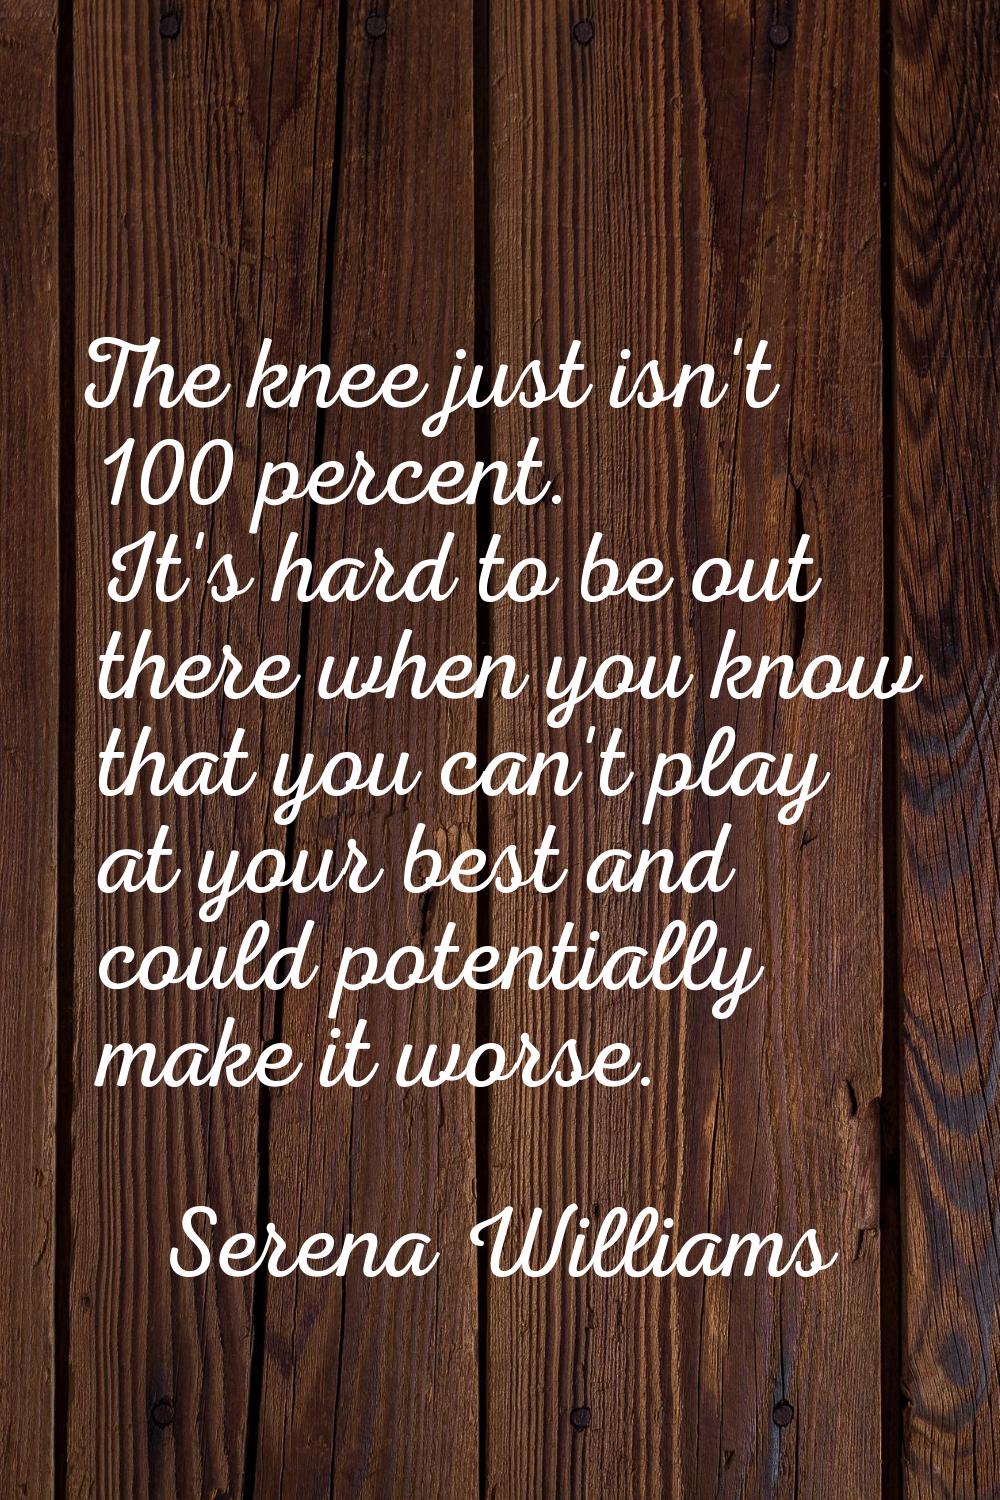 The knee just isn't 100 percent. It's hard to be out there when you know that you can't play at you